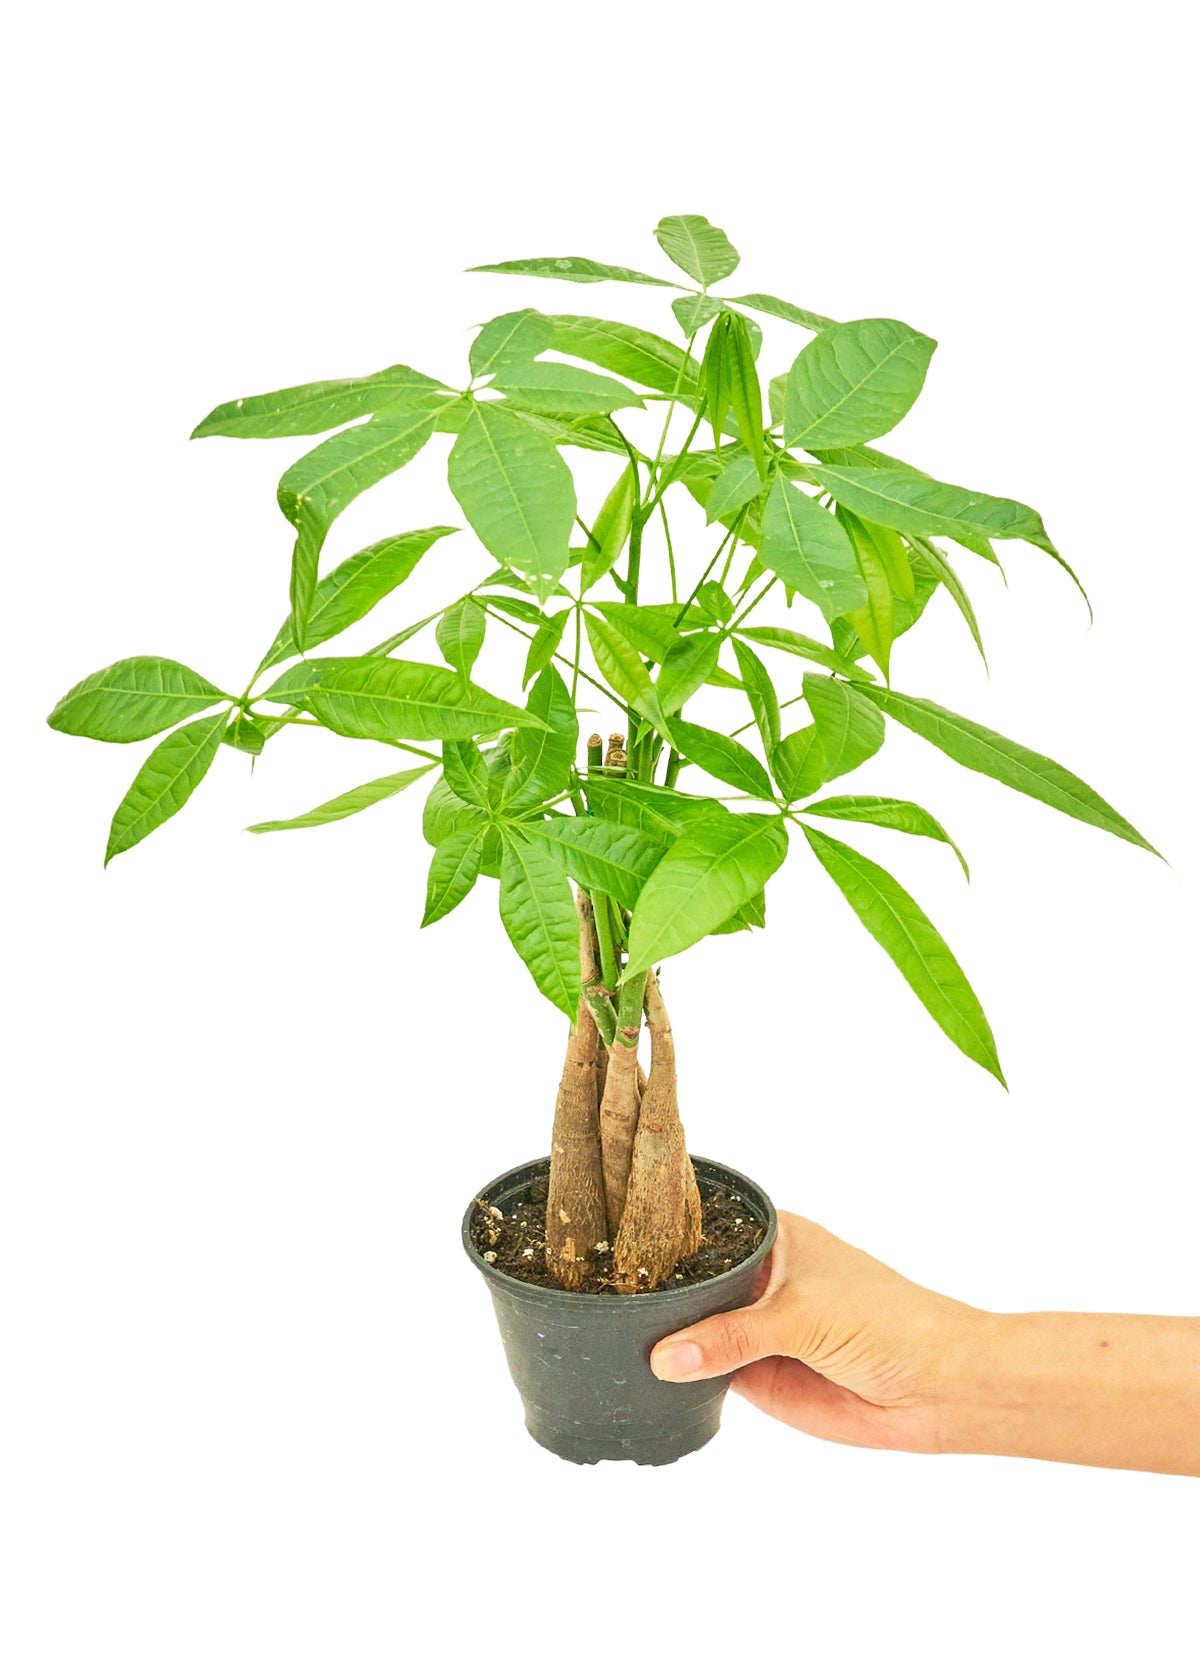 Small size Braided Money Tree plant in a growers pot with a white background and a hand holding the pot showing the top view